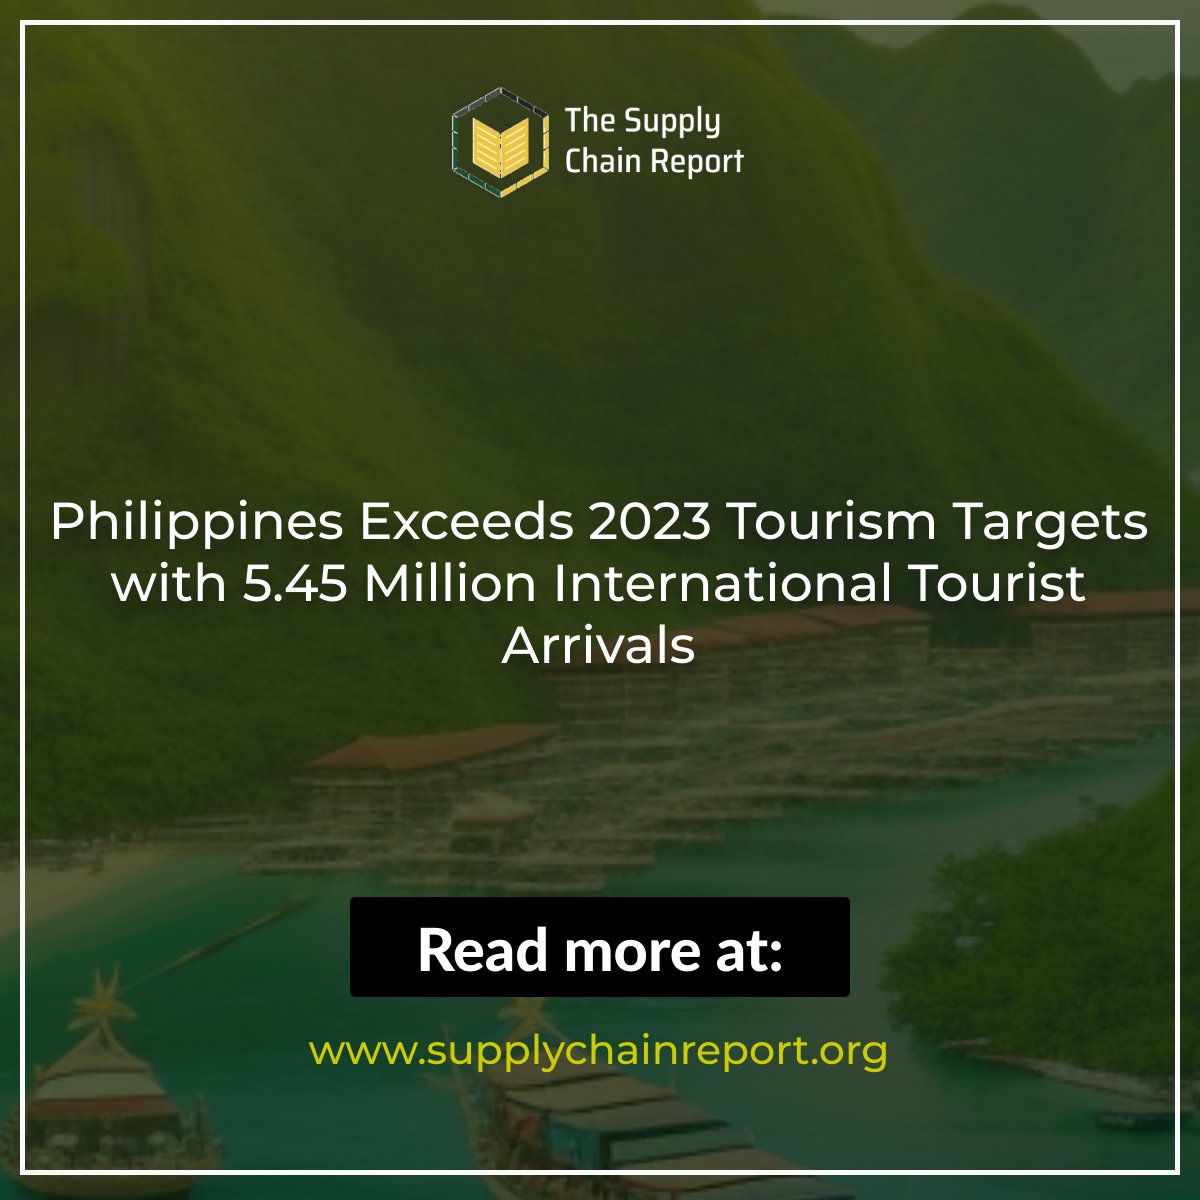 Philippines Exceeds 2023 Tourism Targets with 5.45 Million International Tourist Arrivals
Read more here: supplychainreport.org/philippines-ex…
#TheSupplyChainReport  #internationaltourism